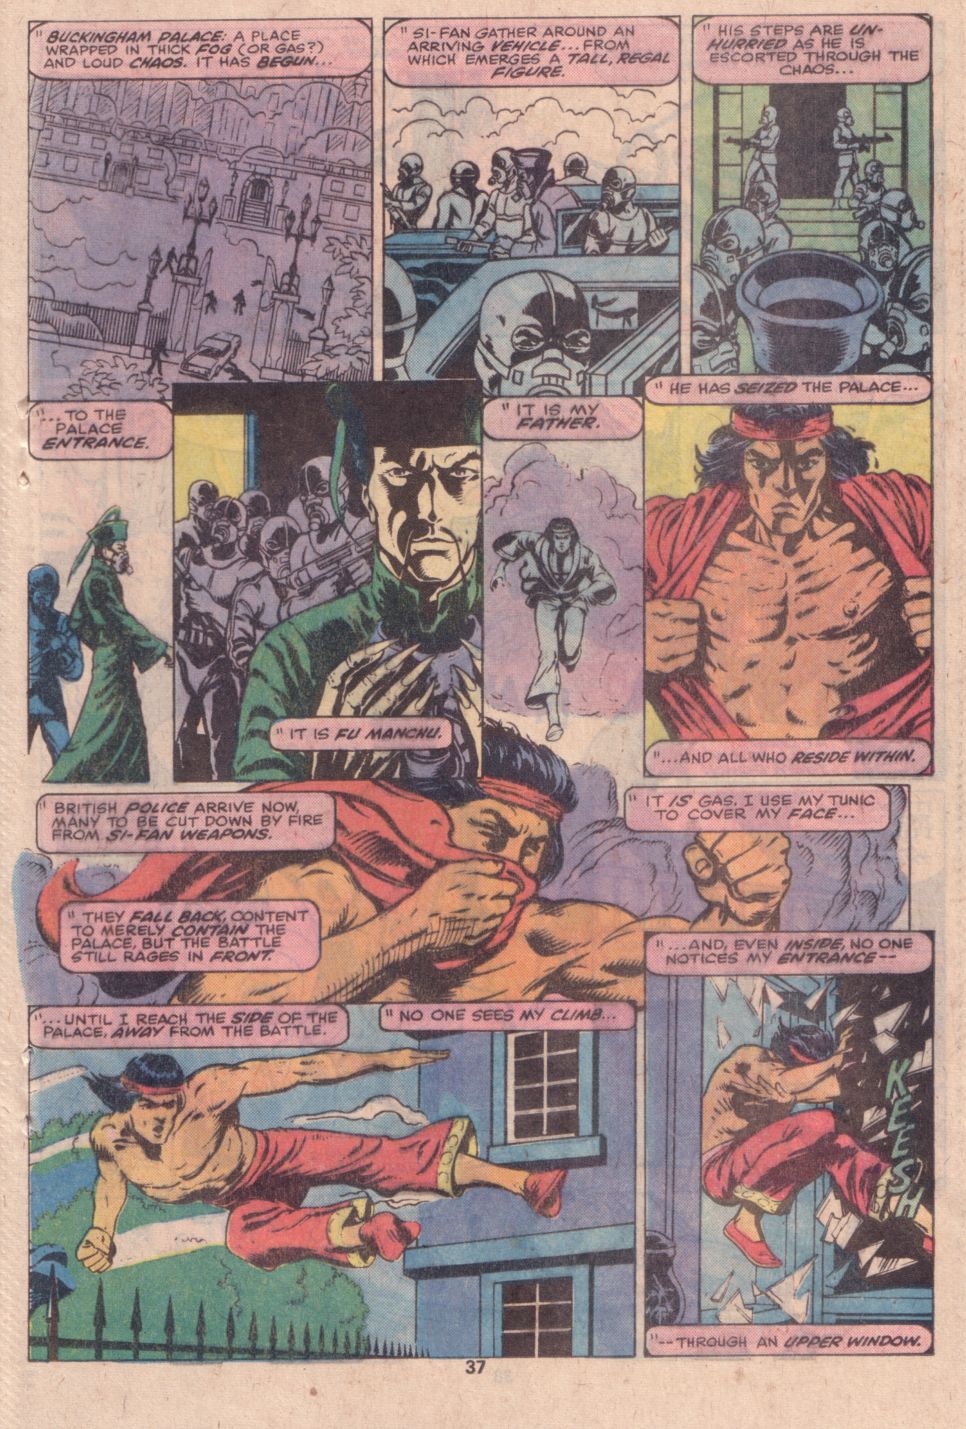 What If? (1977) issue 16 - Shang Chi Master of Kung Fu fought on The side of Fu Manchu - Page 29